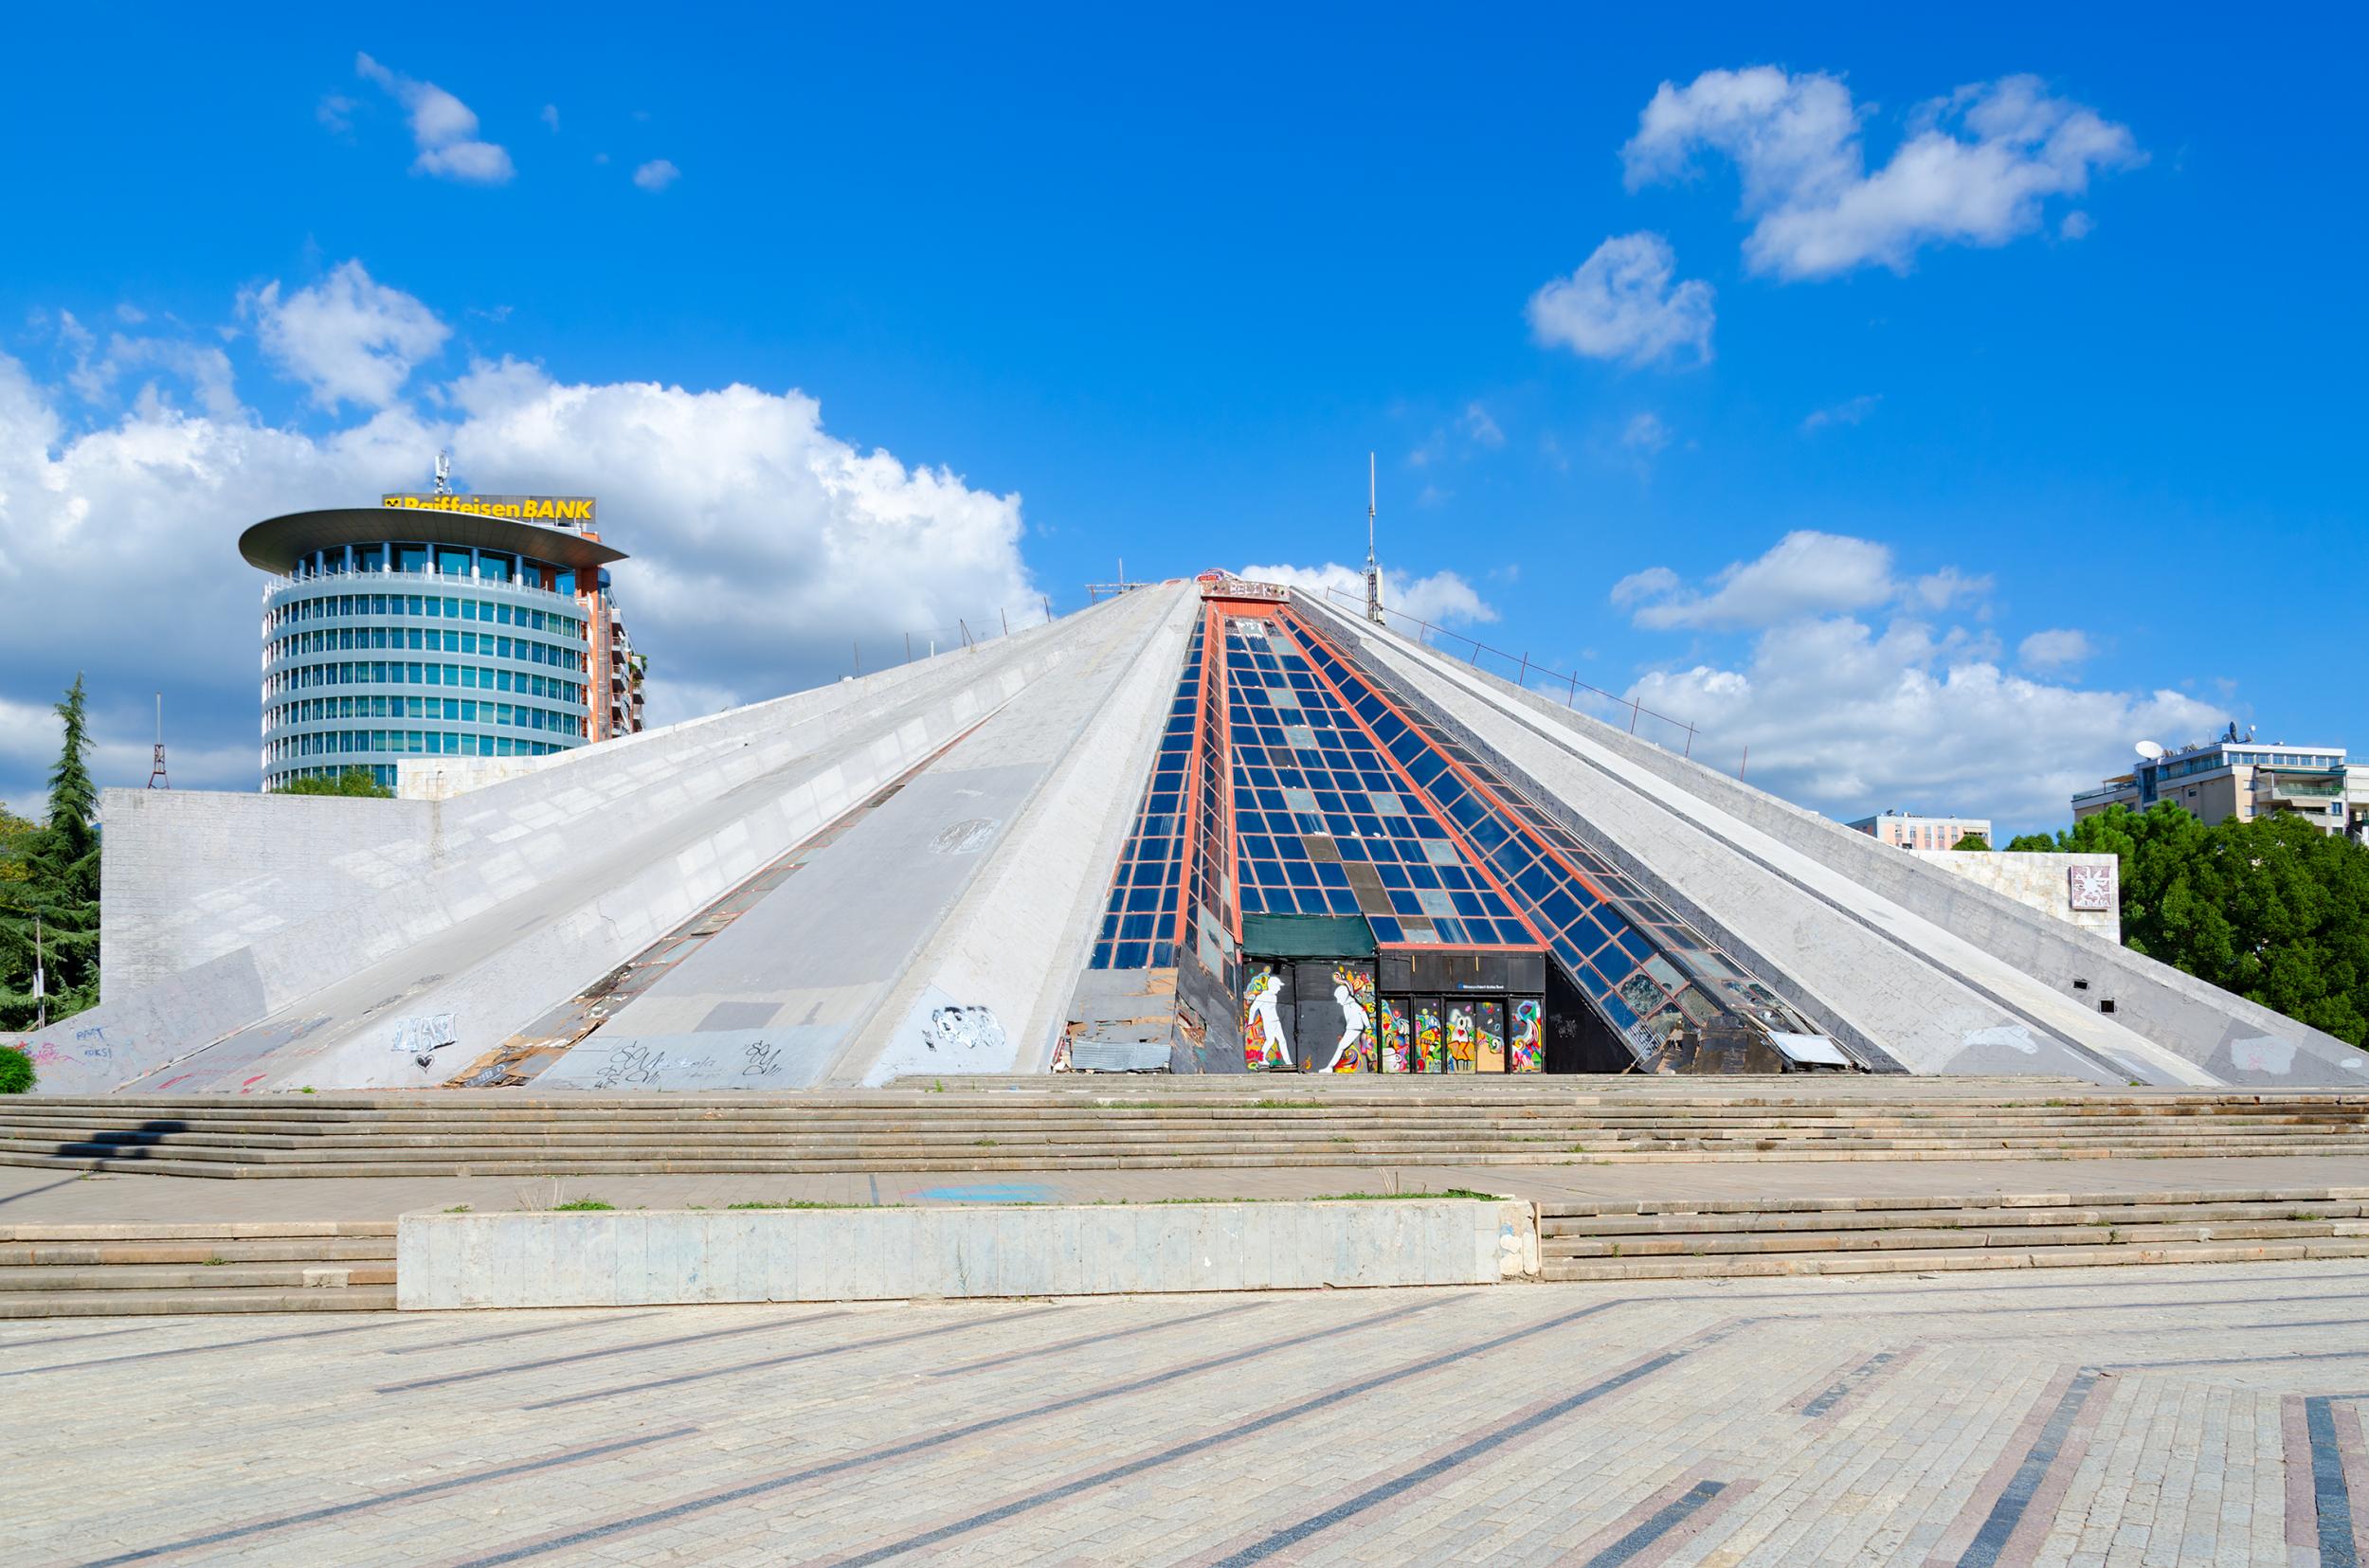 The concrete pyramid is the former museum of the 20th century dictator Hoxha